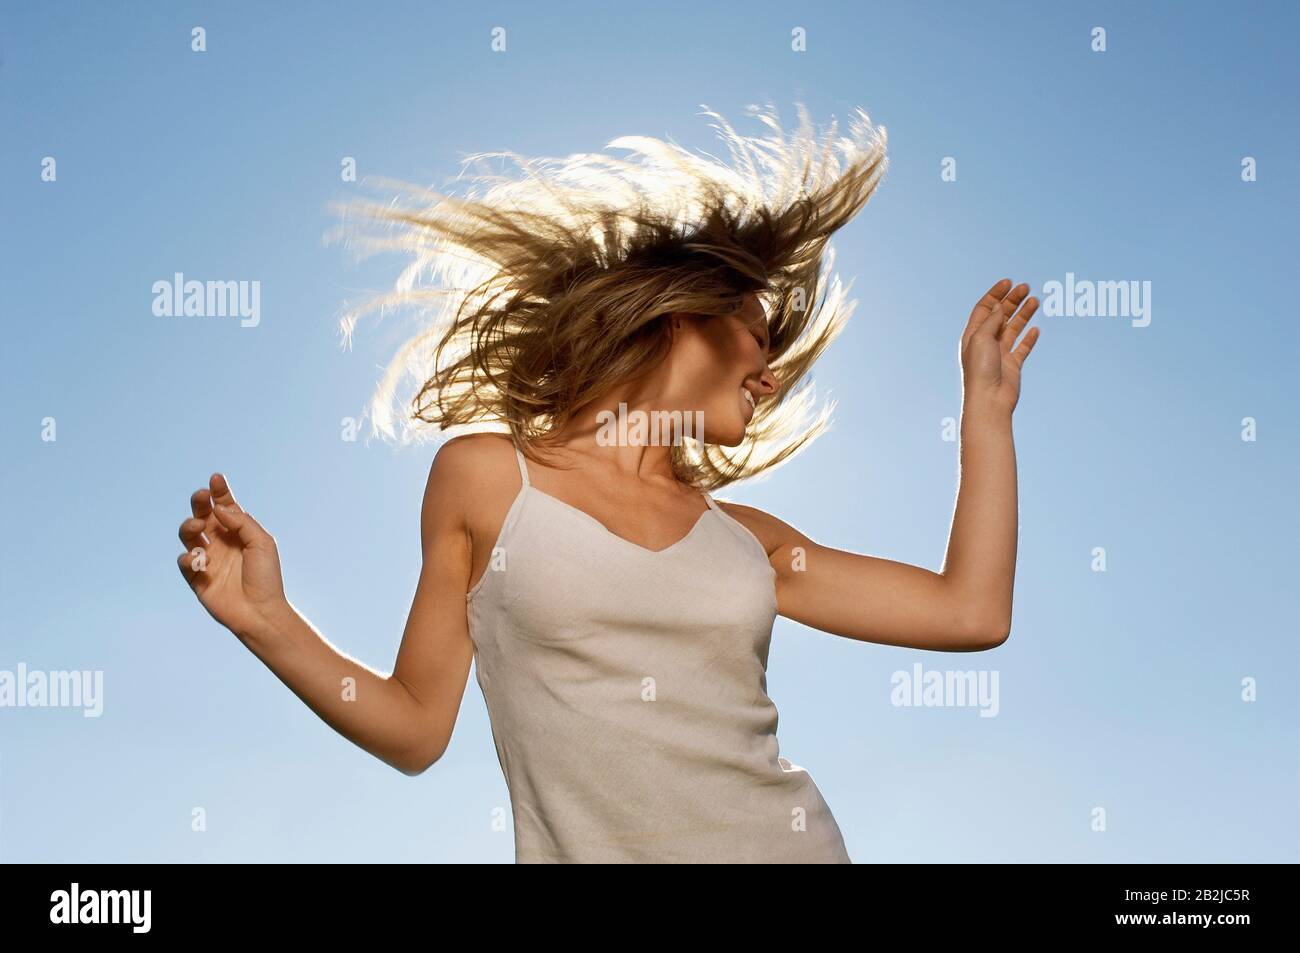 Young woman standing in front of sun tossing hair low angle view Stock Photo